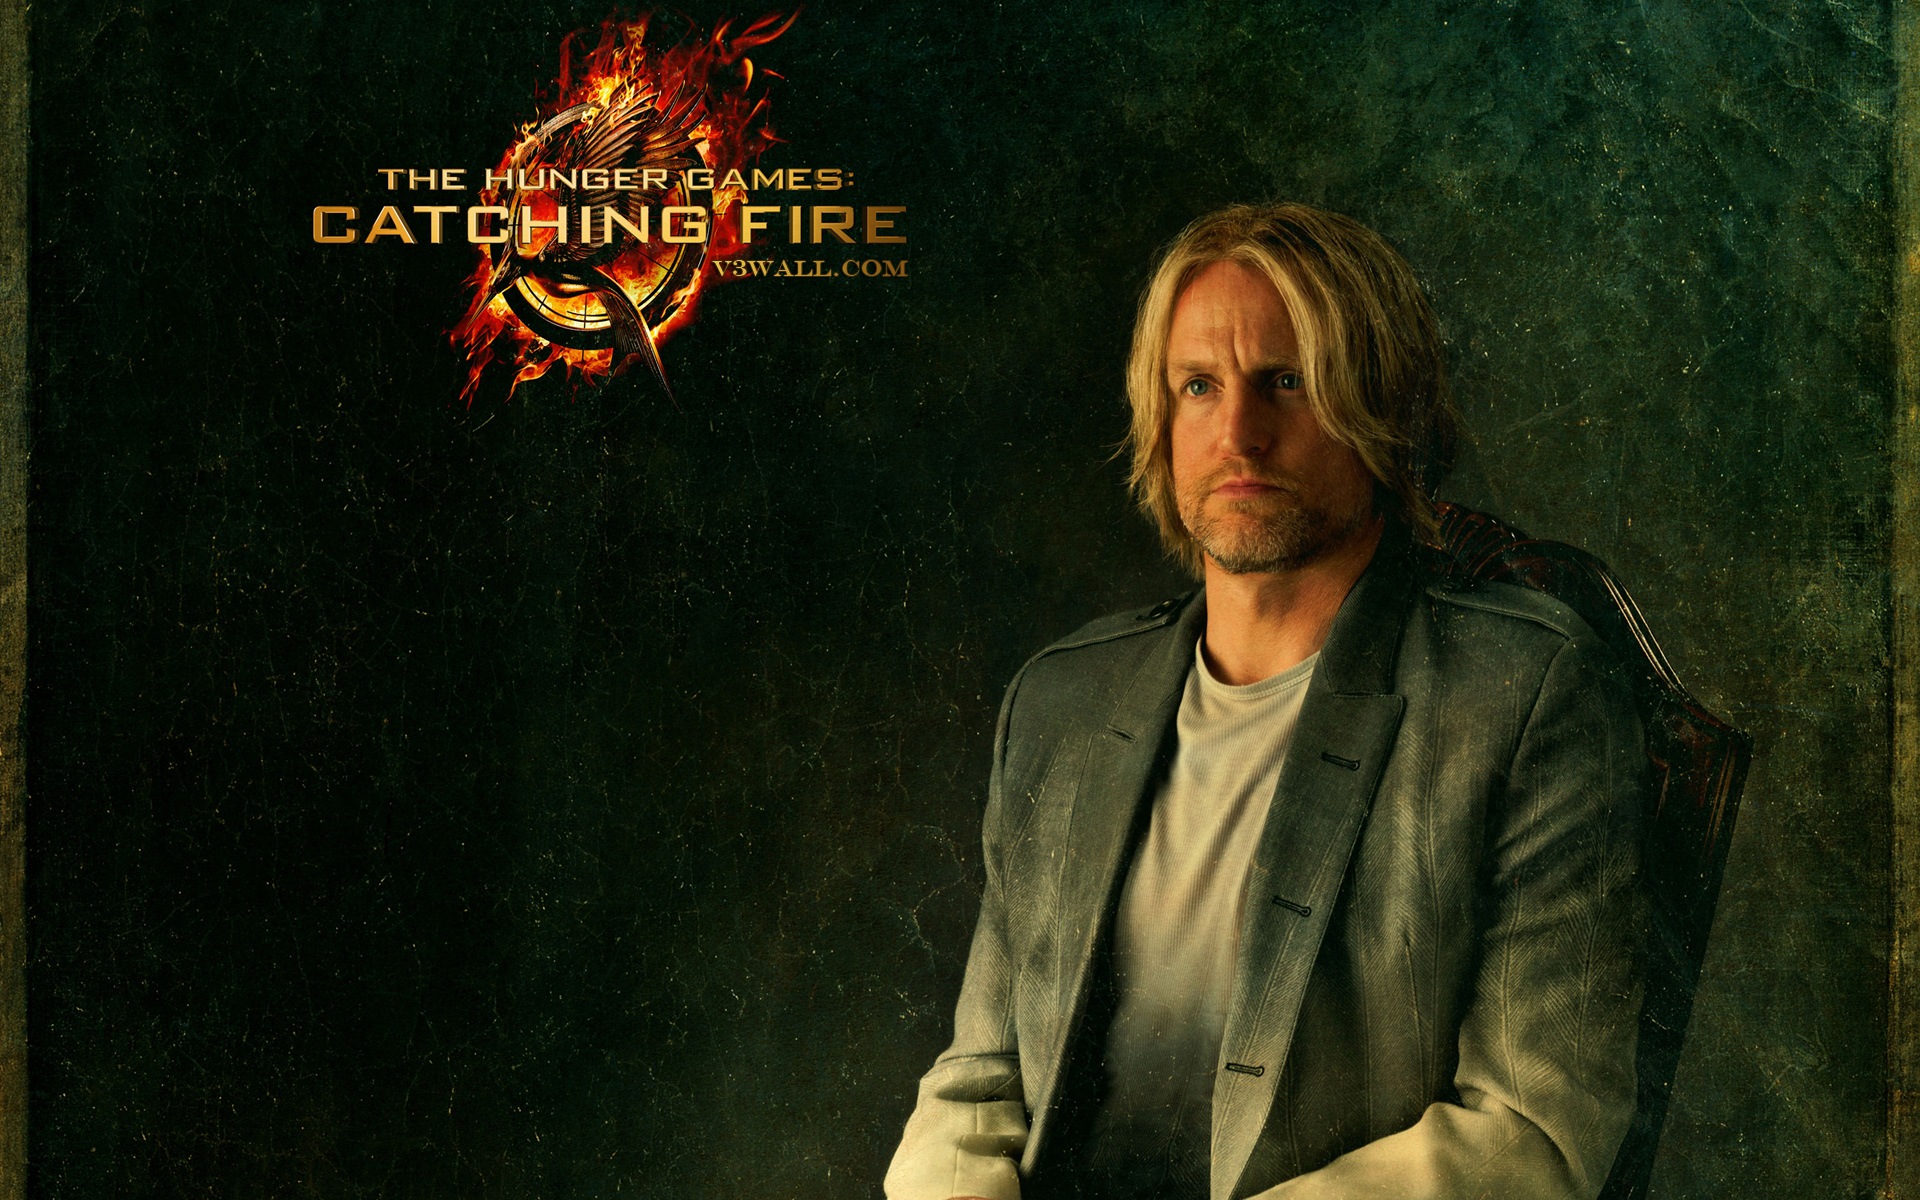 The Hunger Games 2: Catching Fire HD wallpapers #12 - 1920x1200